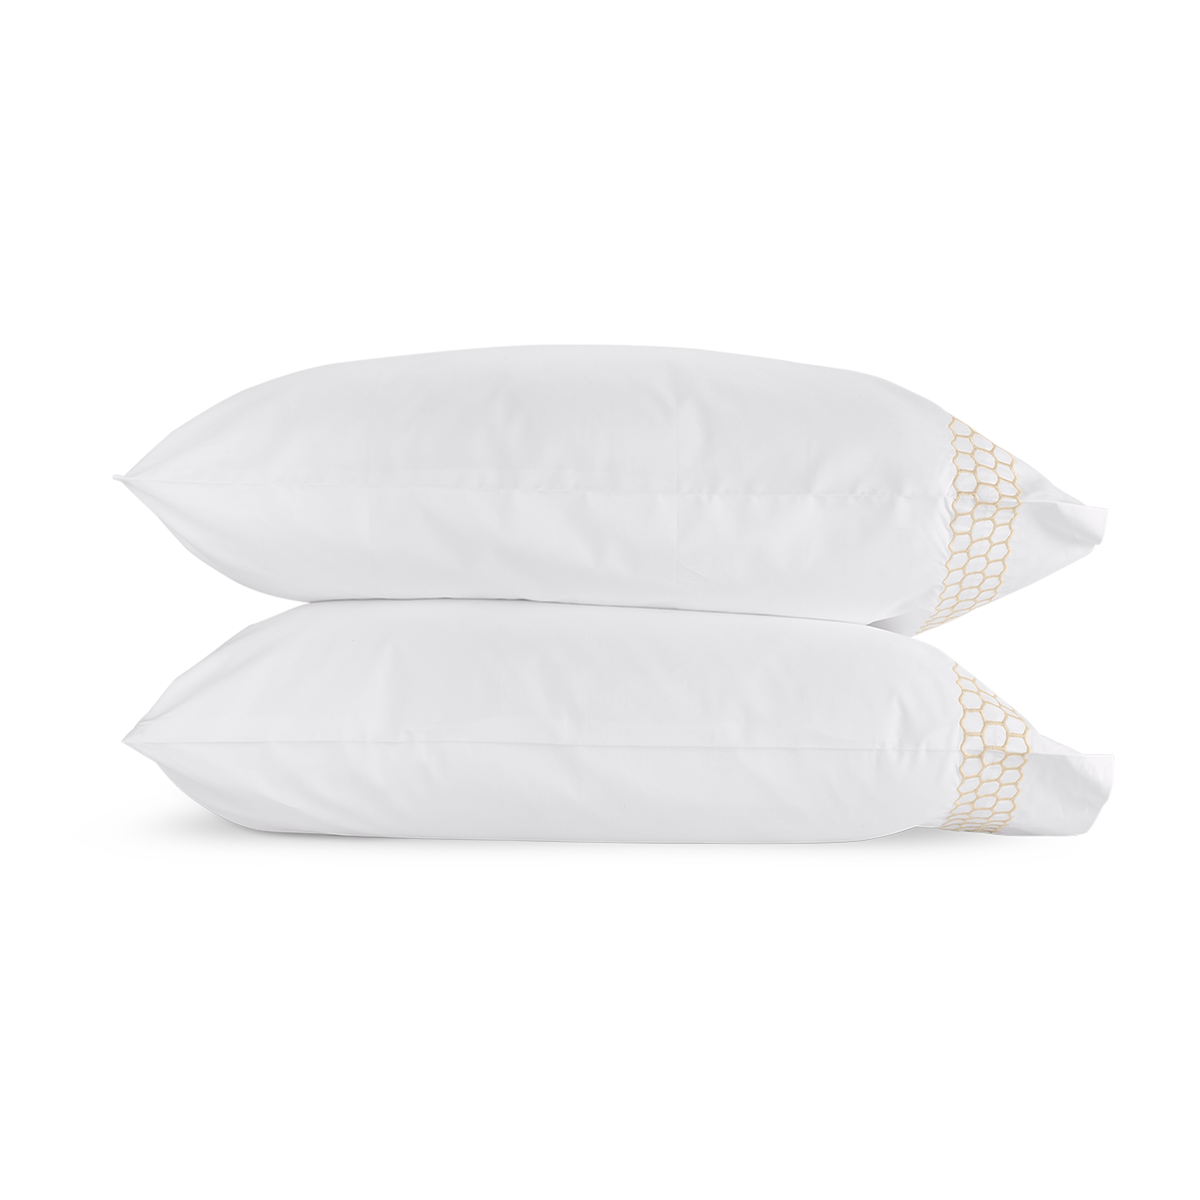 Clear Image of Matouk Liana Bedding Pillowcases in Pillowcases Color